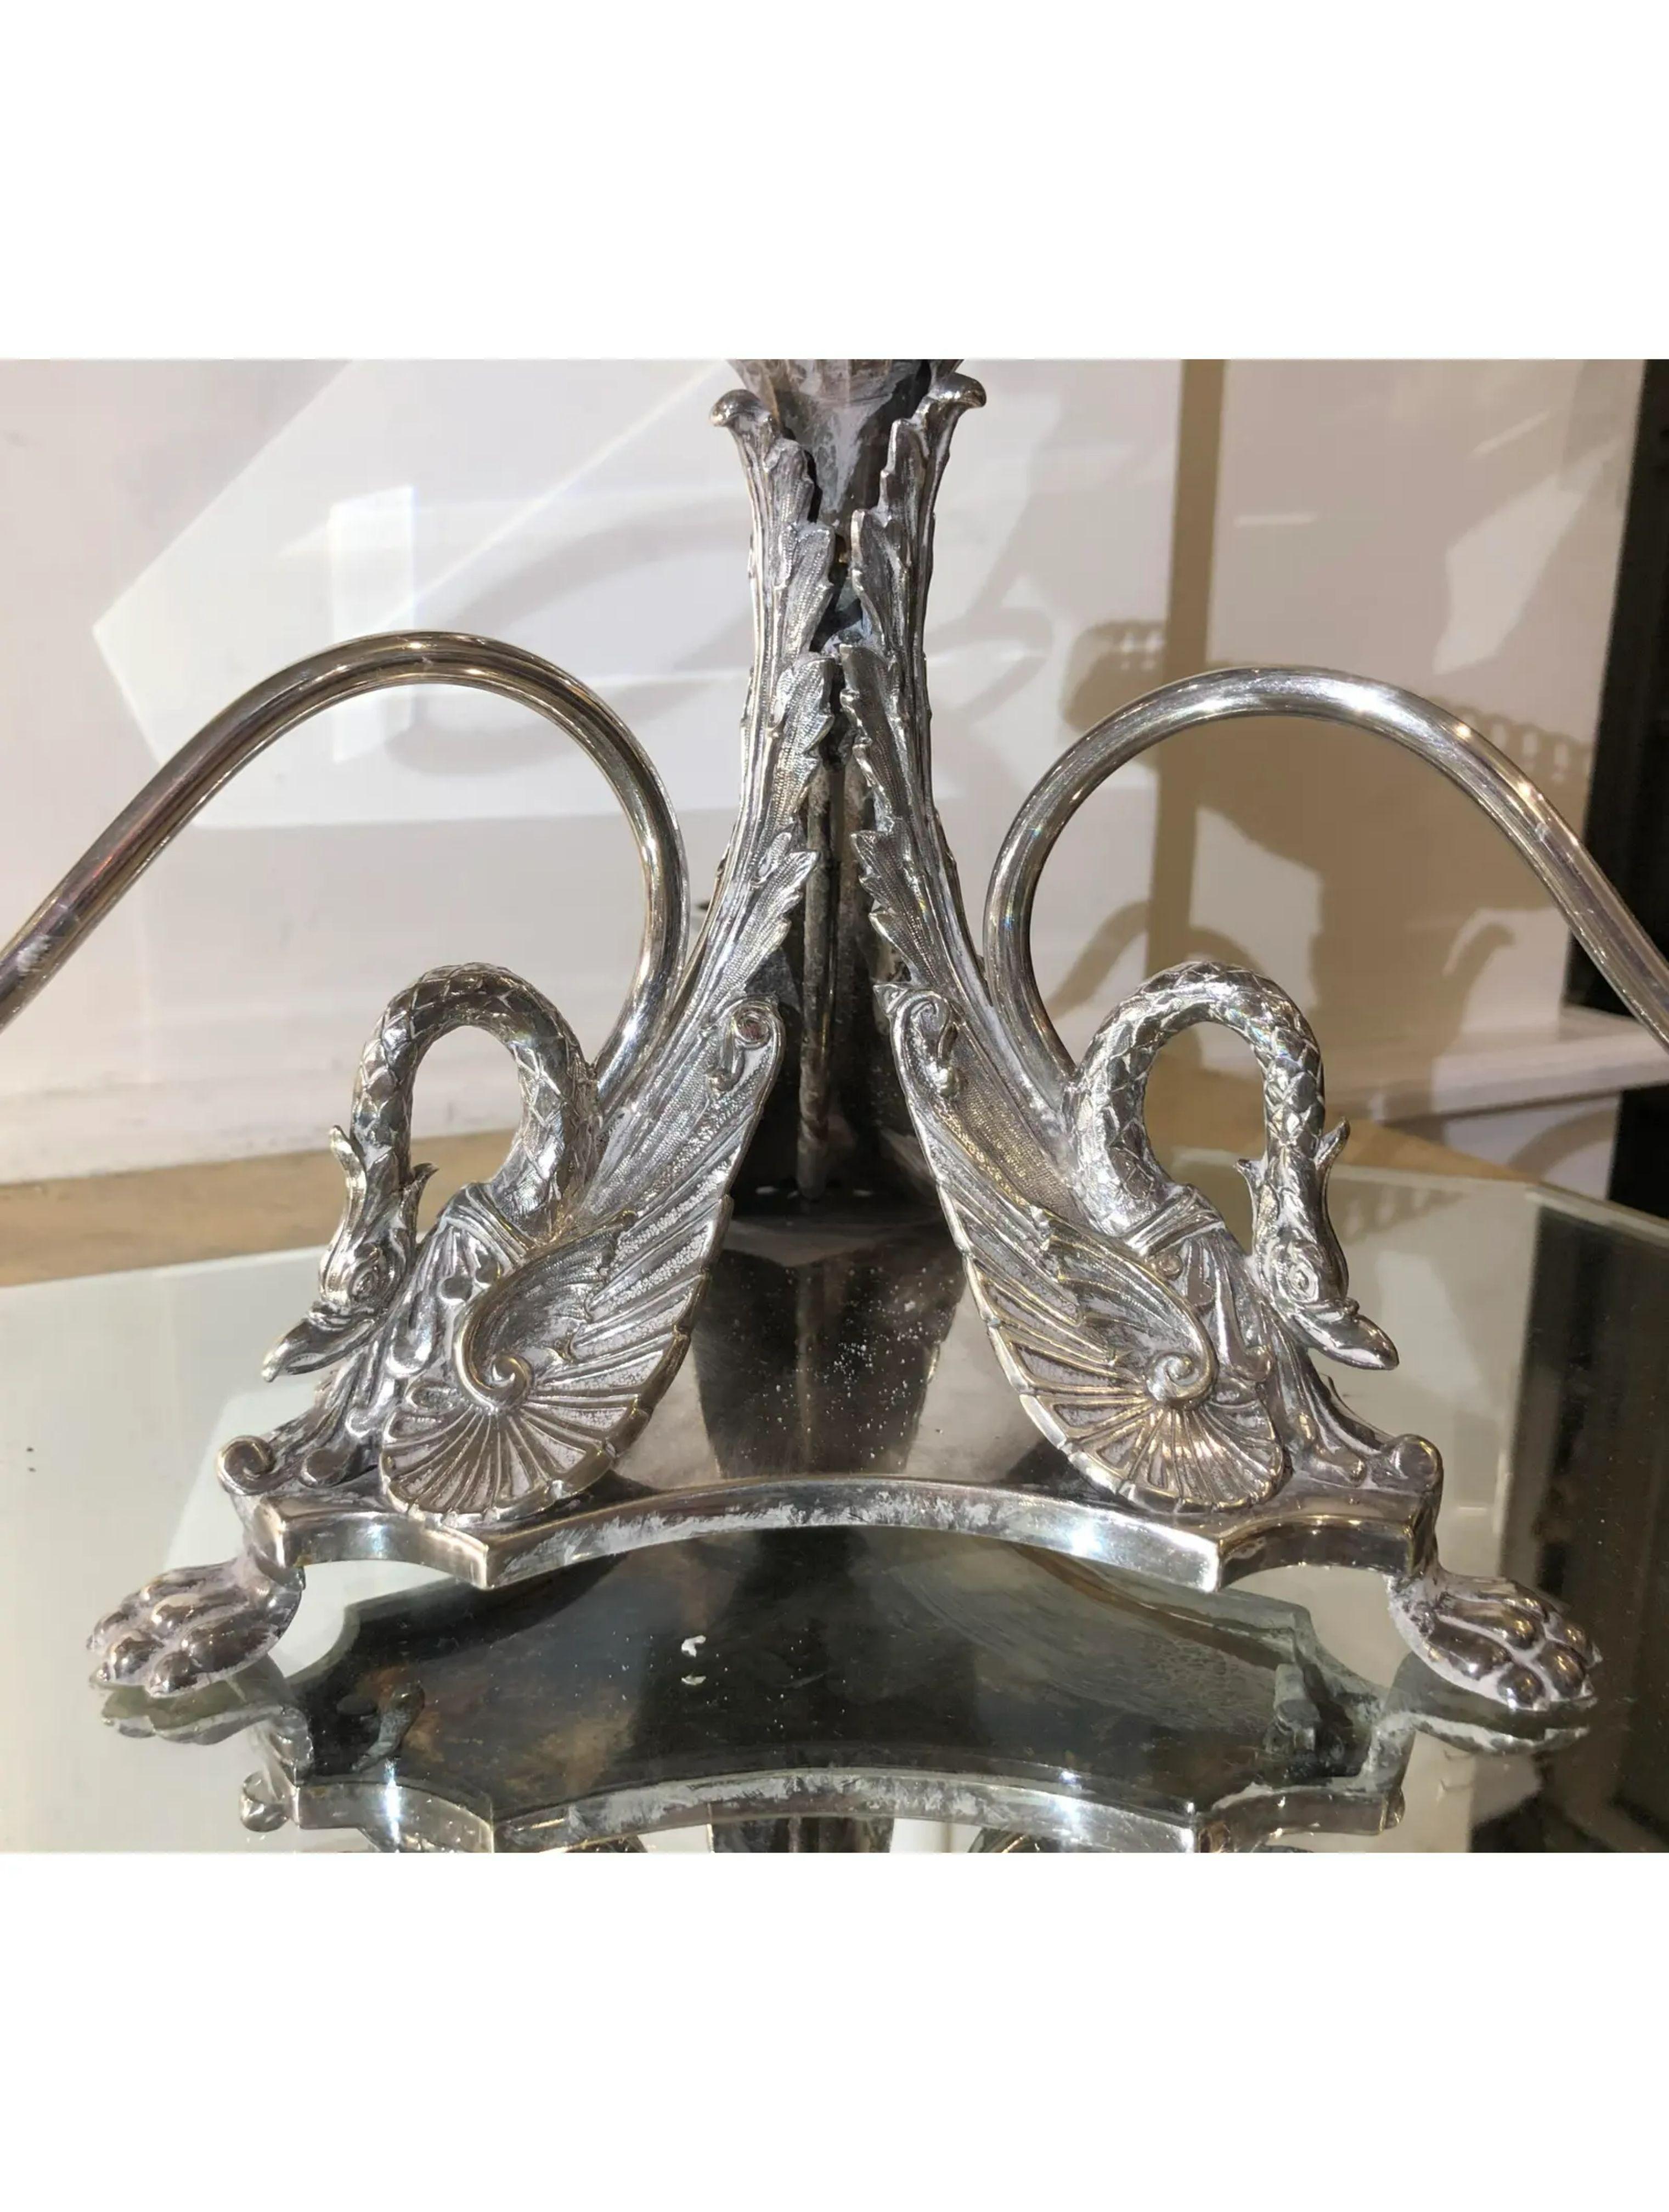 British Antique English Silver Plate & Crystal Centerpiece, Mid-19th Century